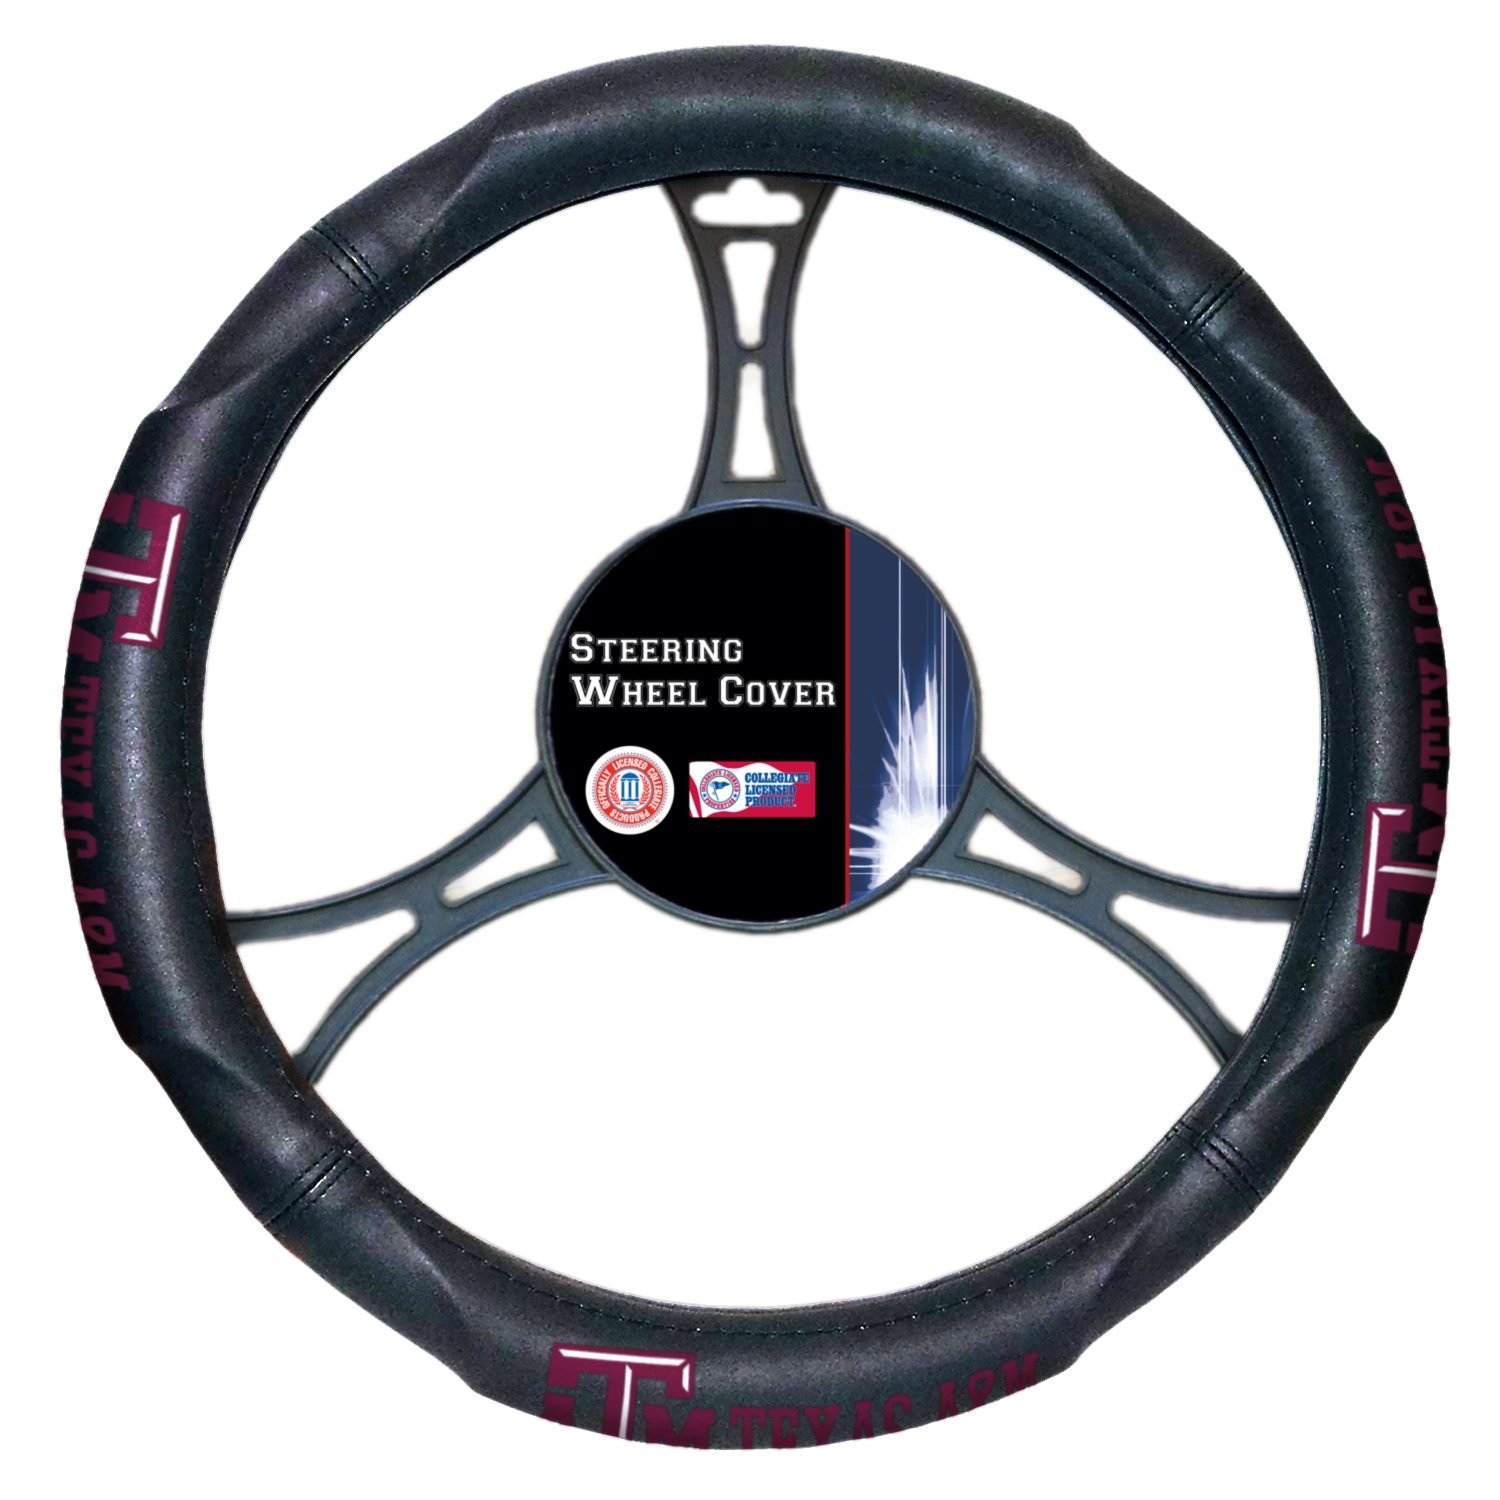 NCAA Texas A&M Aggies Steering Wheel Cover - image 1 of 1